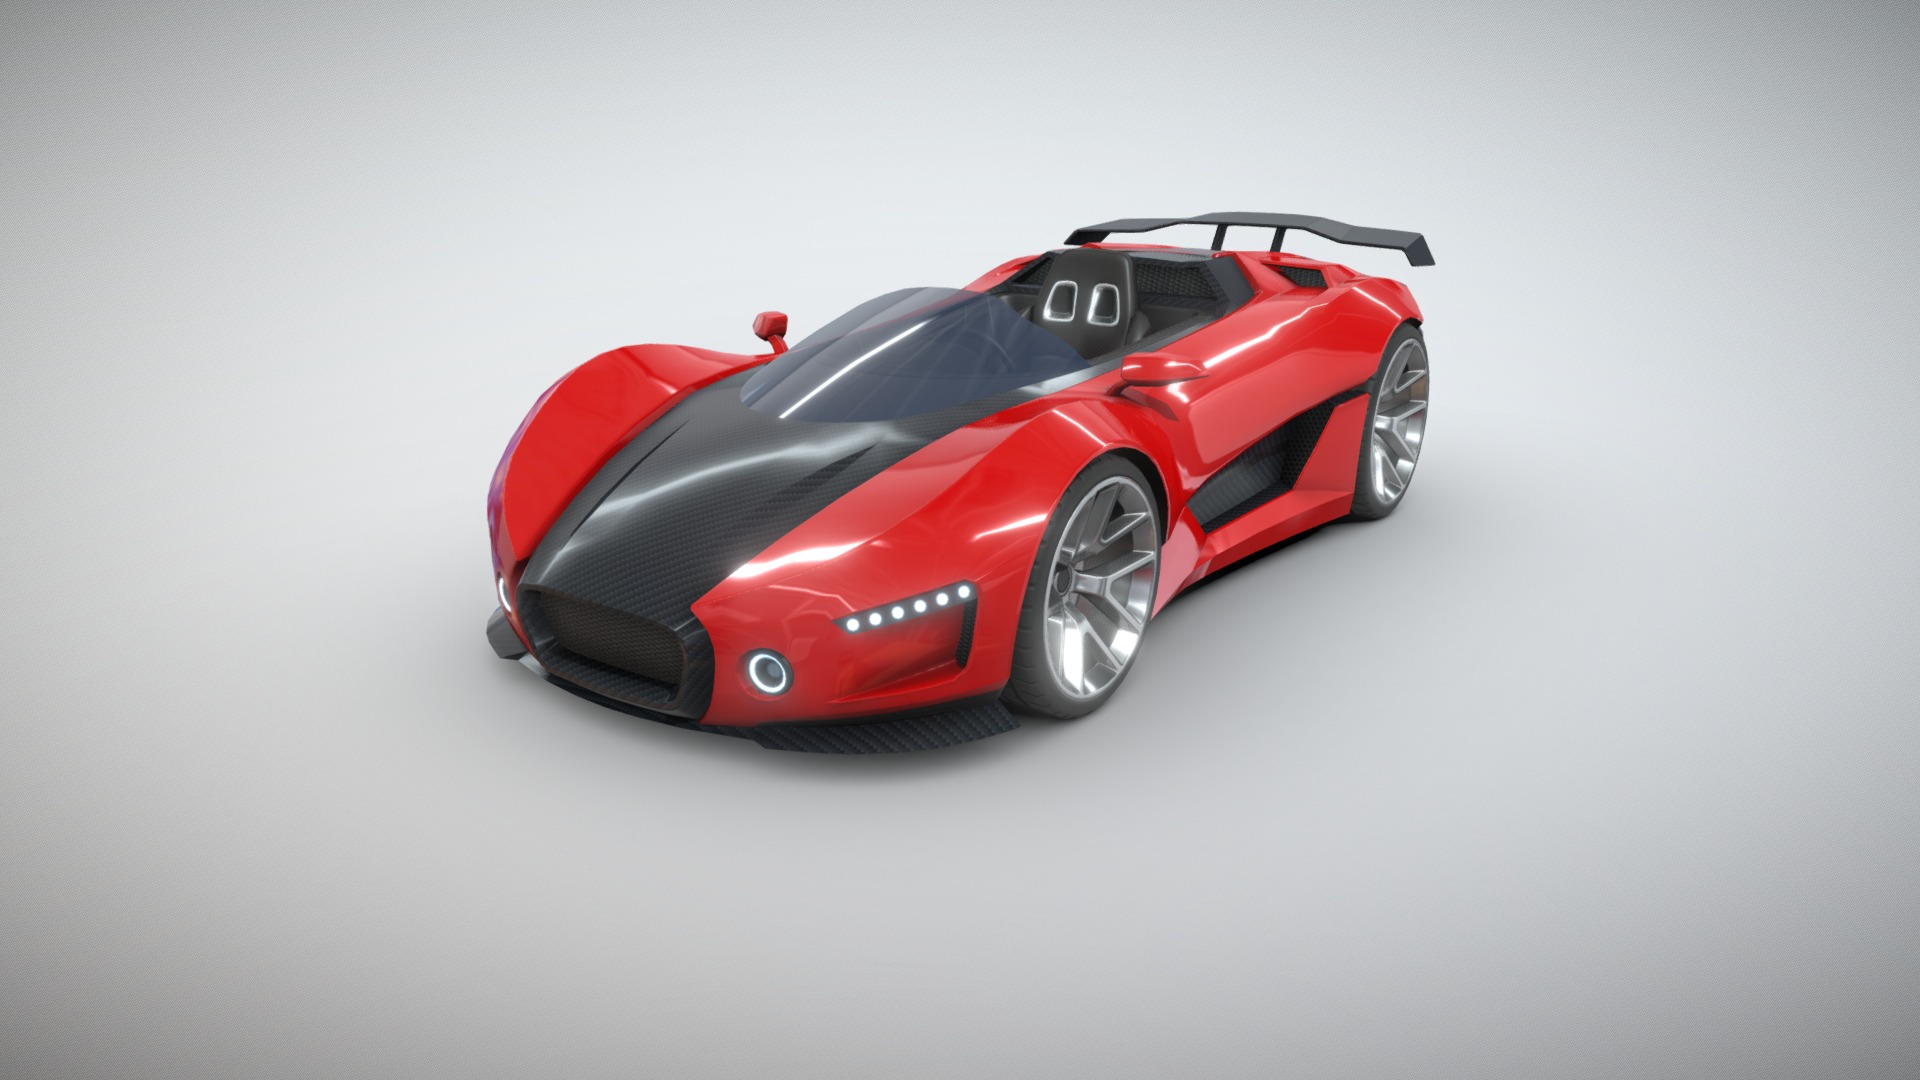 3D model Race Kart 04 - This is a 3D model of the Race Kart 04. The 3D model is about a red sports car.